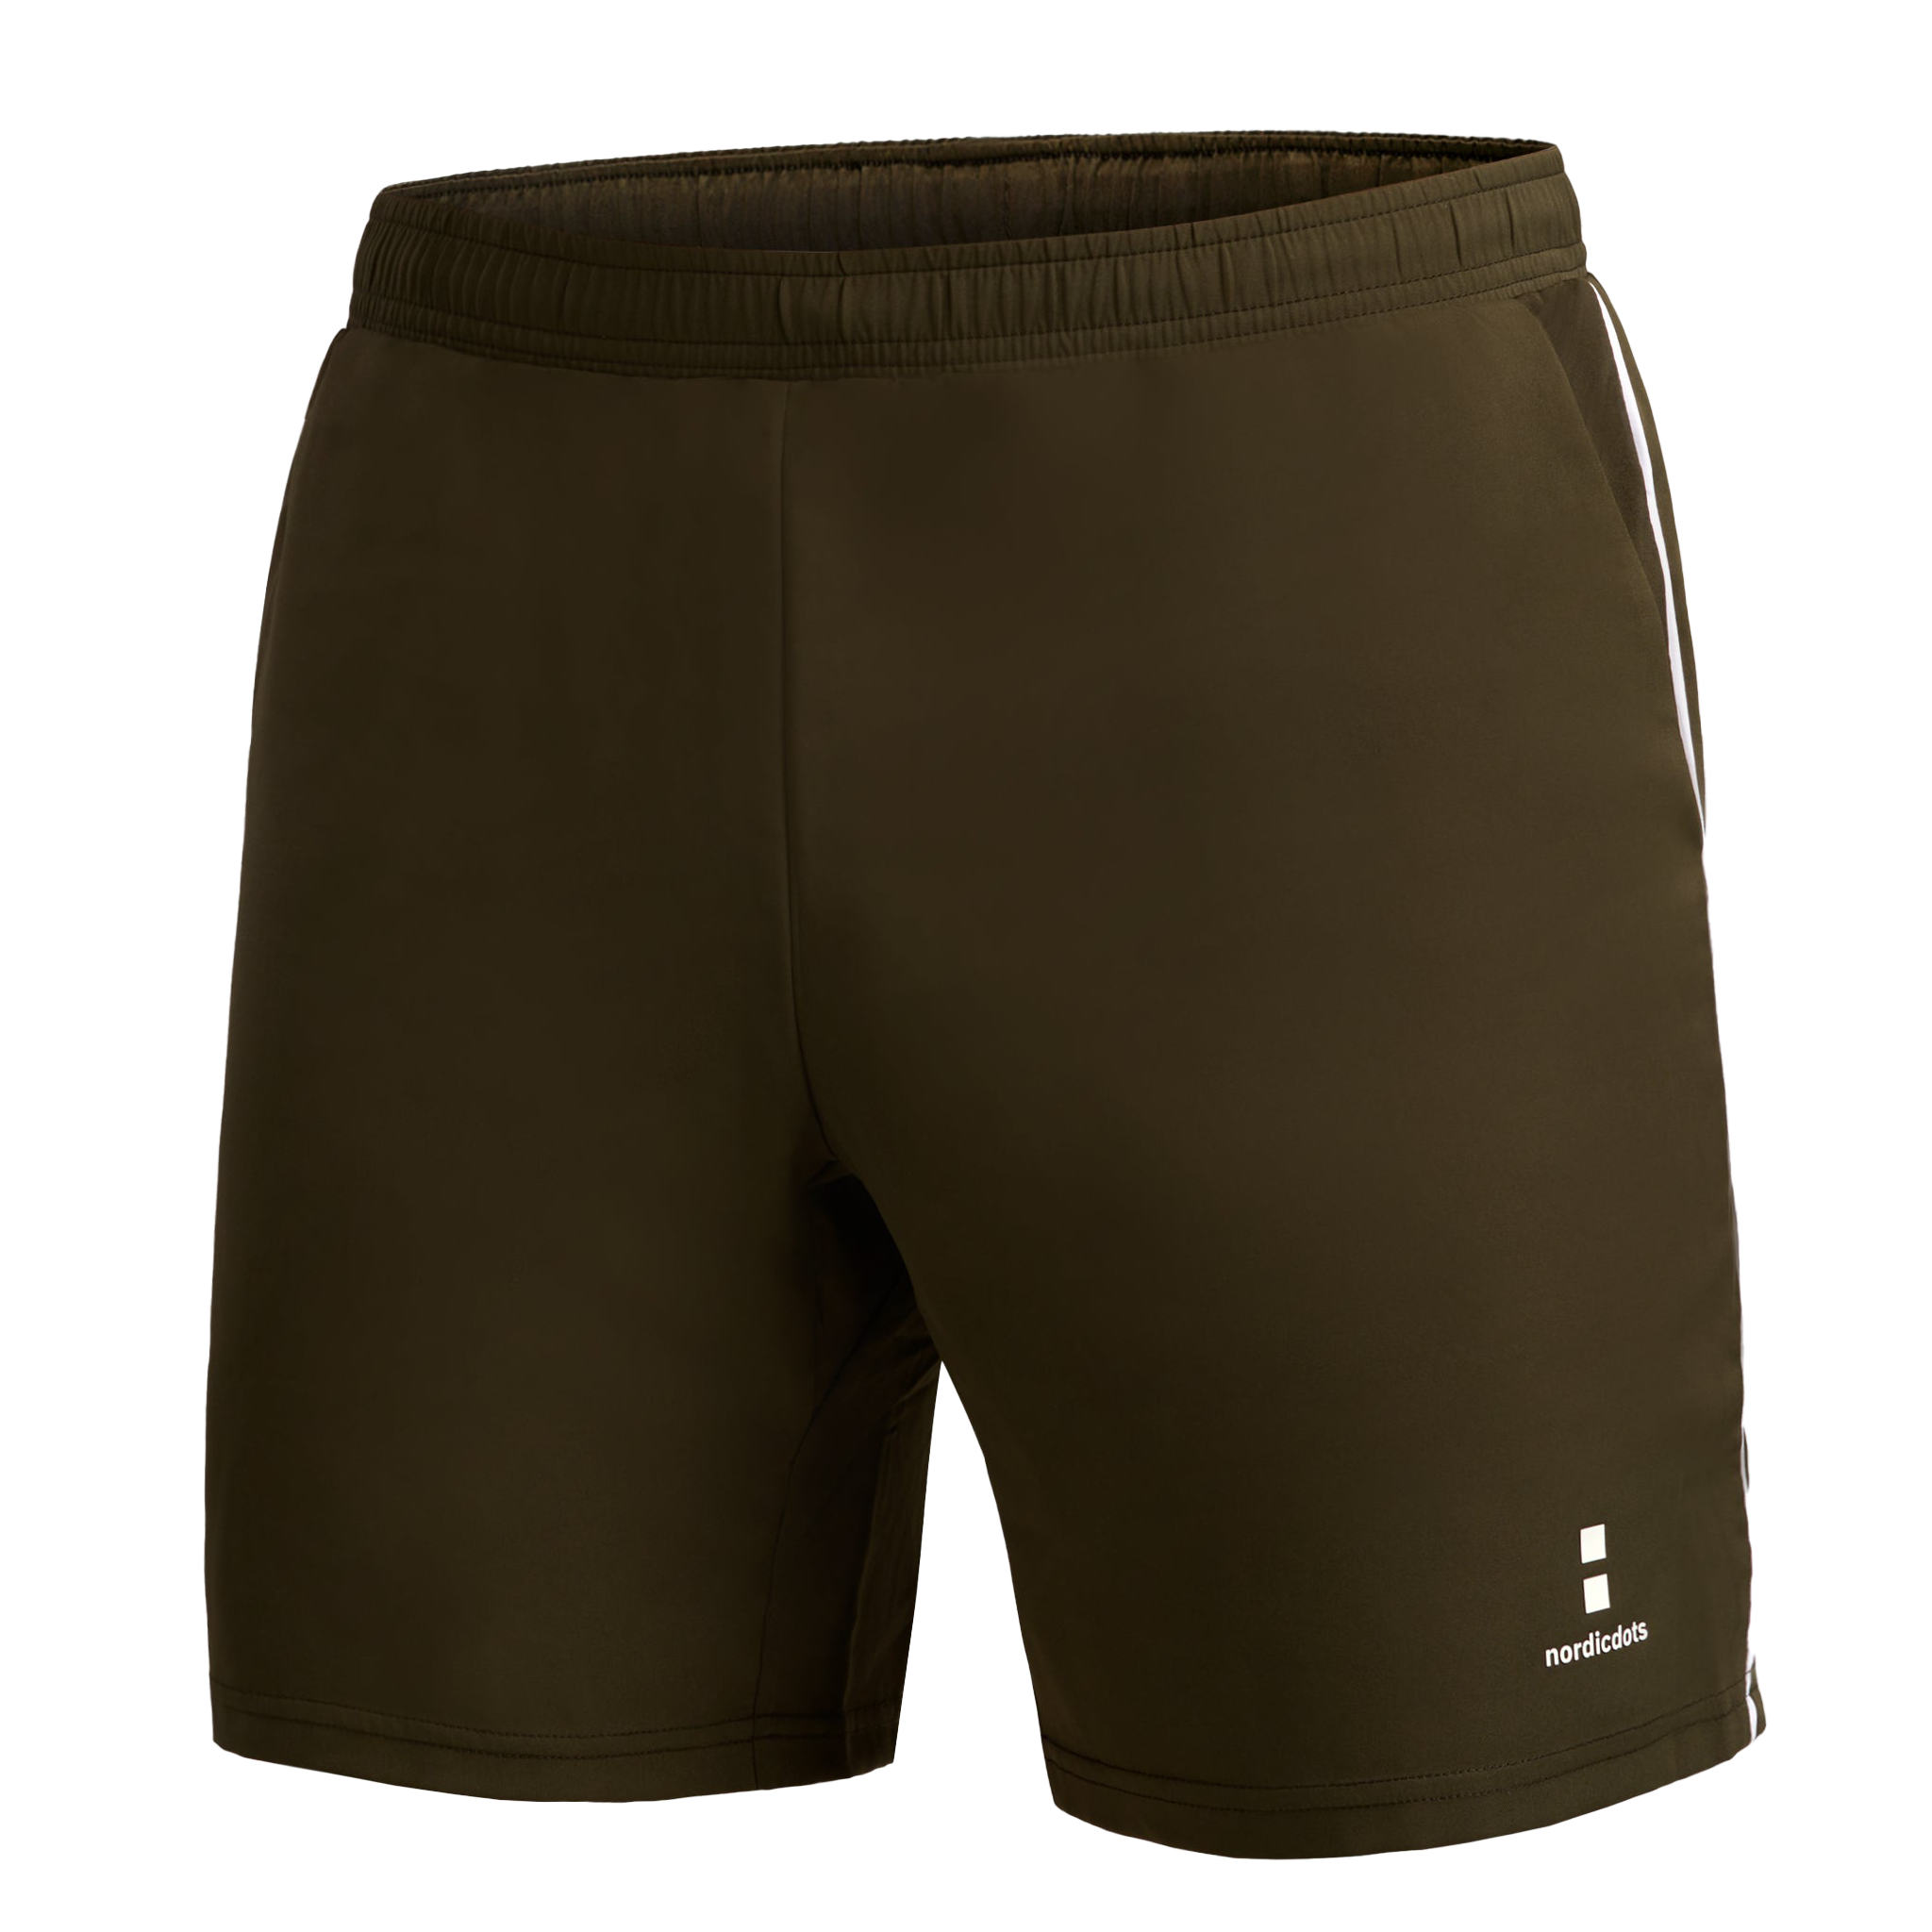 nordicdots Performance Shorts Olive